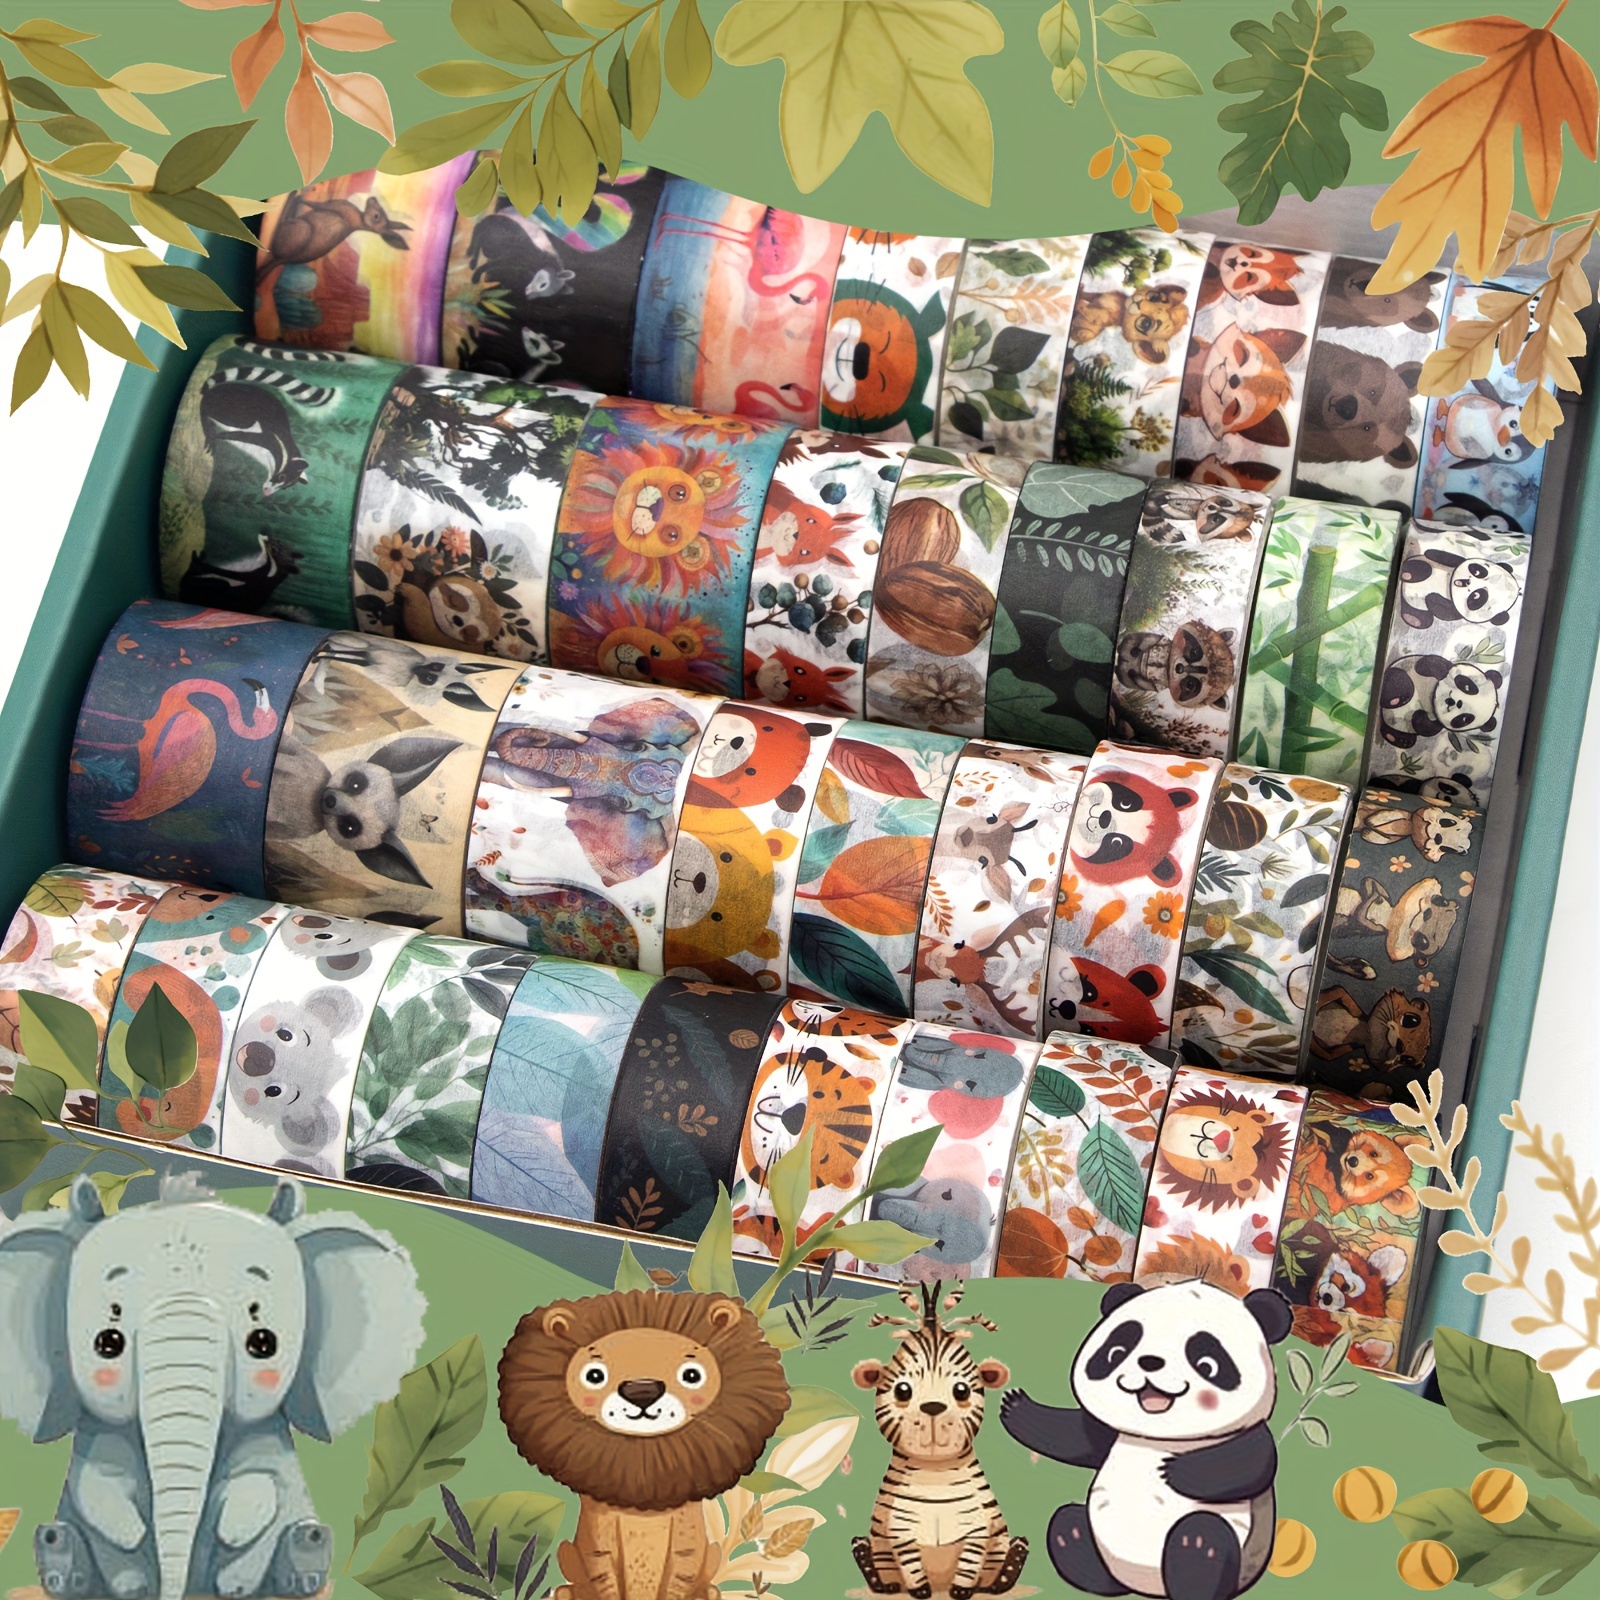 

Value Pack 38pcs Cute Wild Washi Tape Set, 38 Rolls Animals Washi Tapes For Journaling Supplies, 25mm & 15mm Wide Kawaii Tape For Scrapbooking, Planners, Diy Crafts